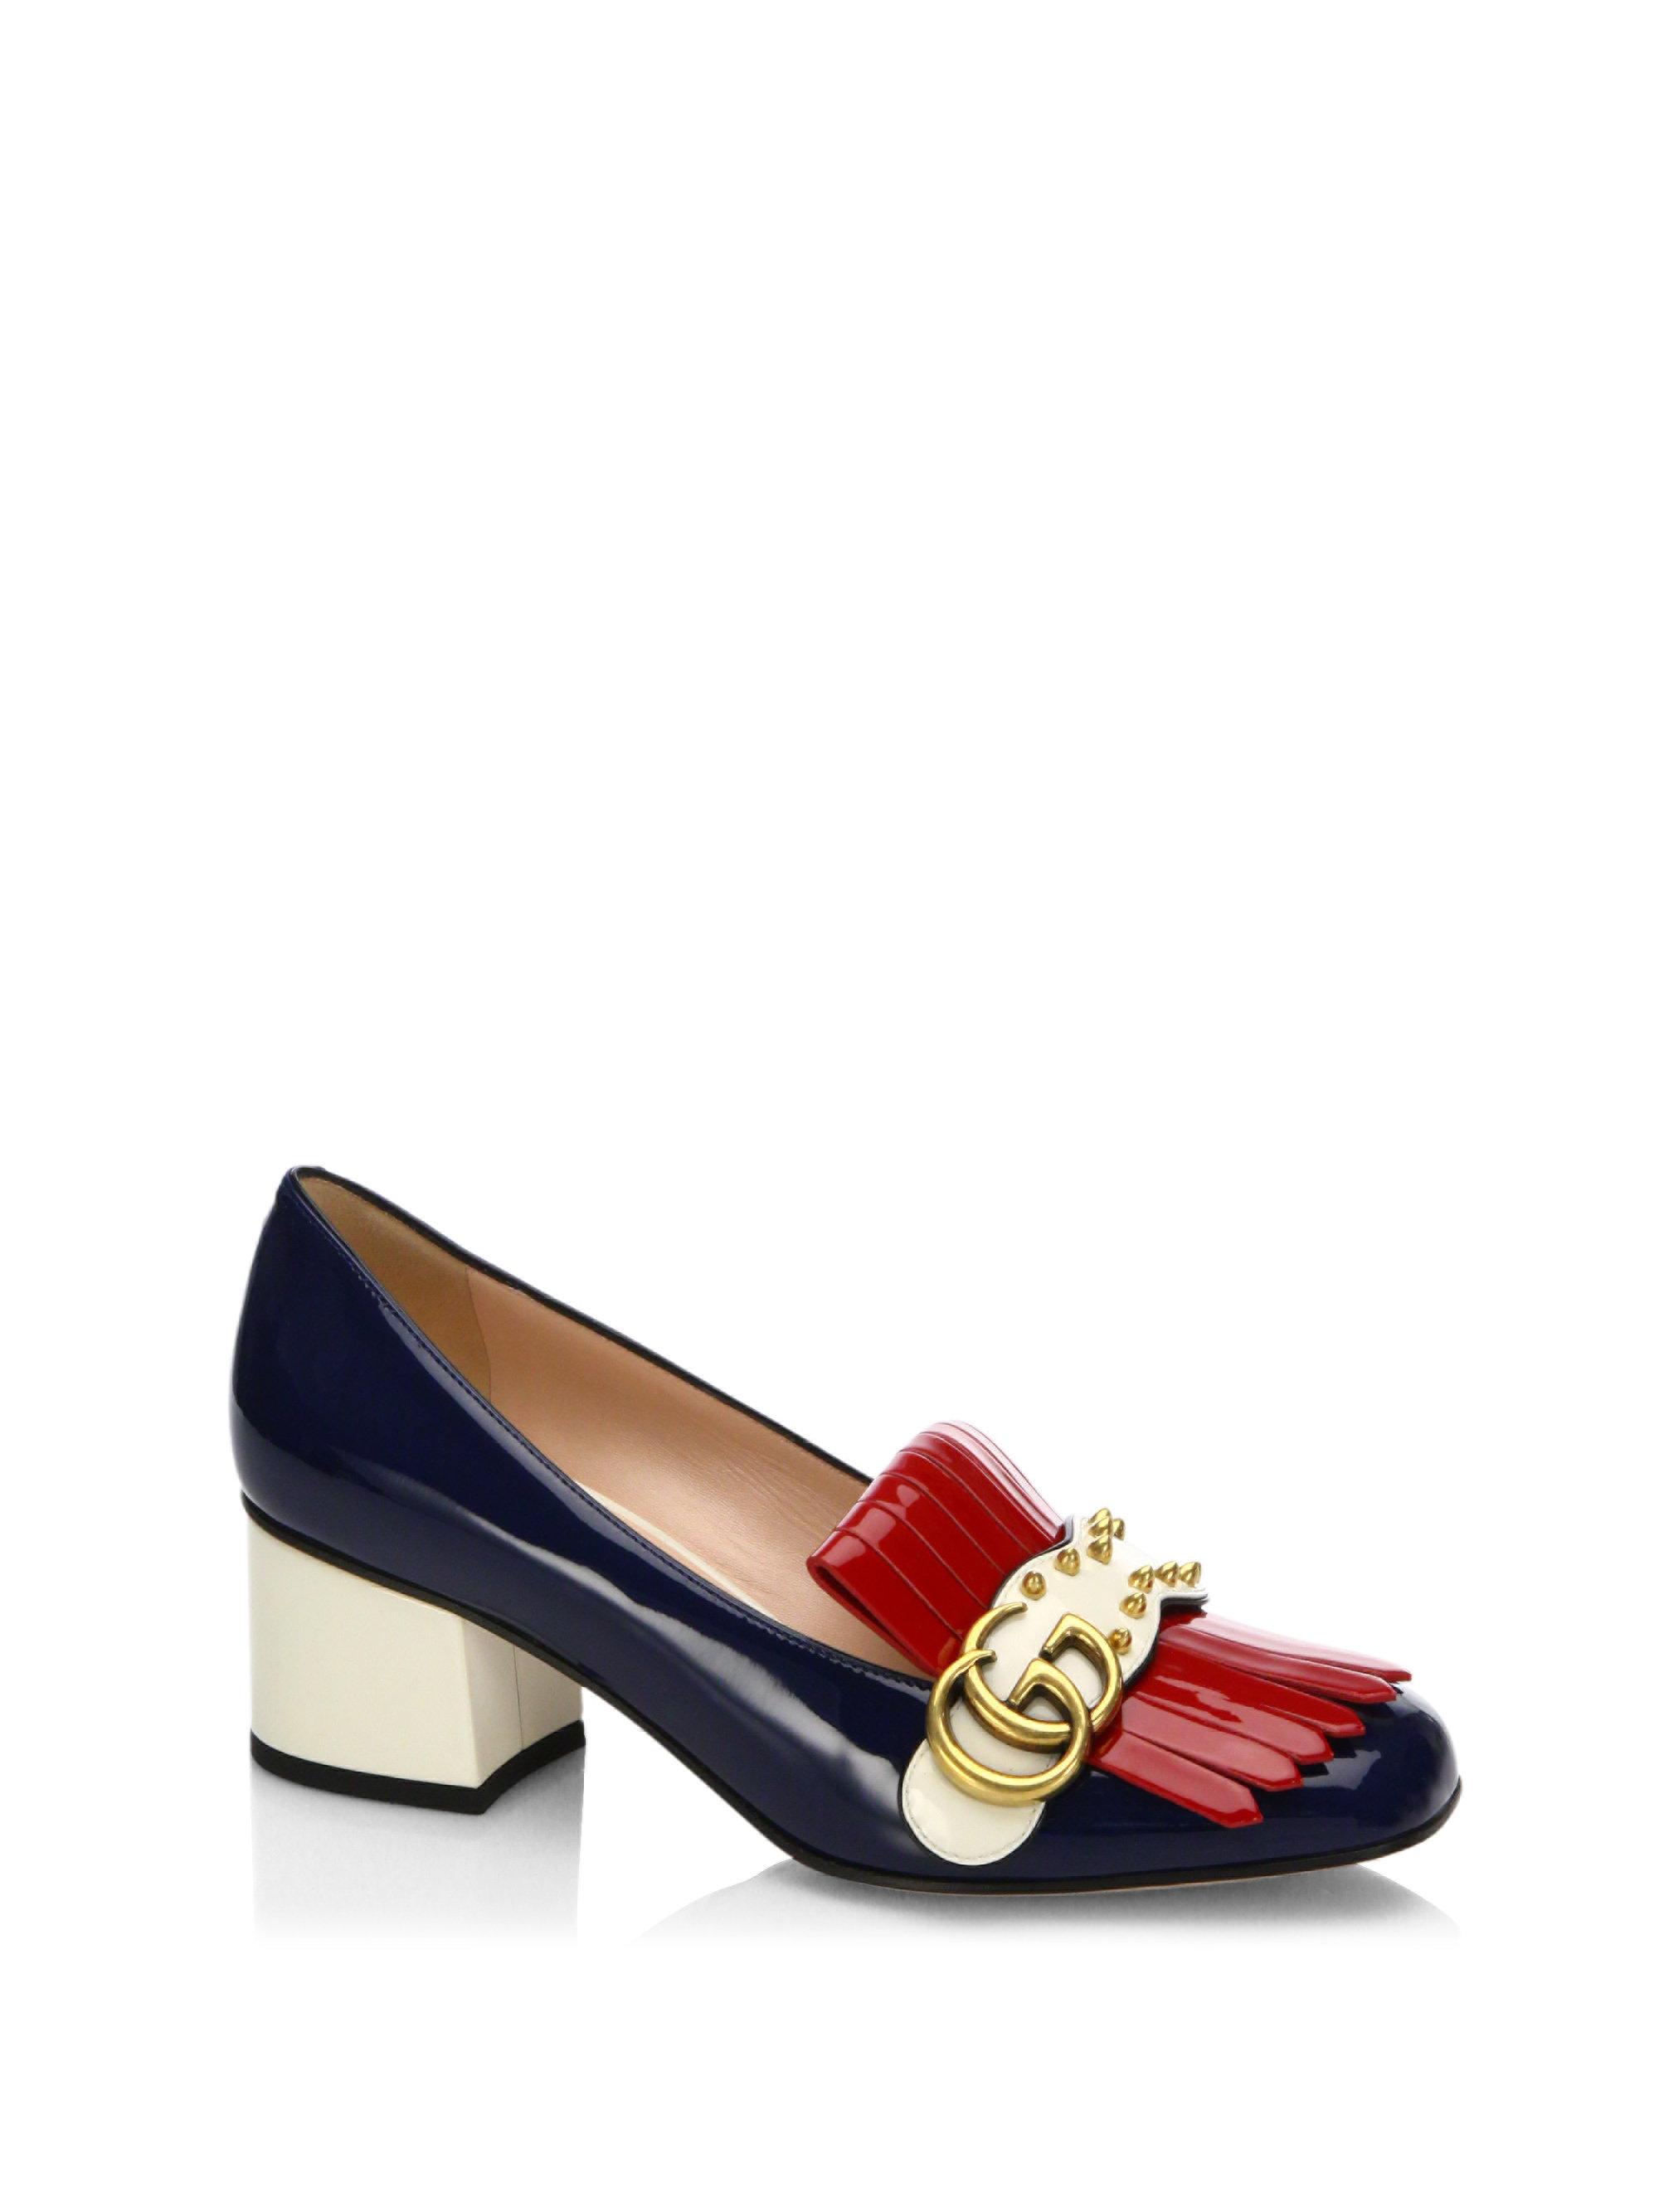 Gucci Marmont Gg Studded Tri-tone Patent Leather Loafer Pumps in Blue | Lyst